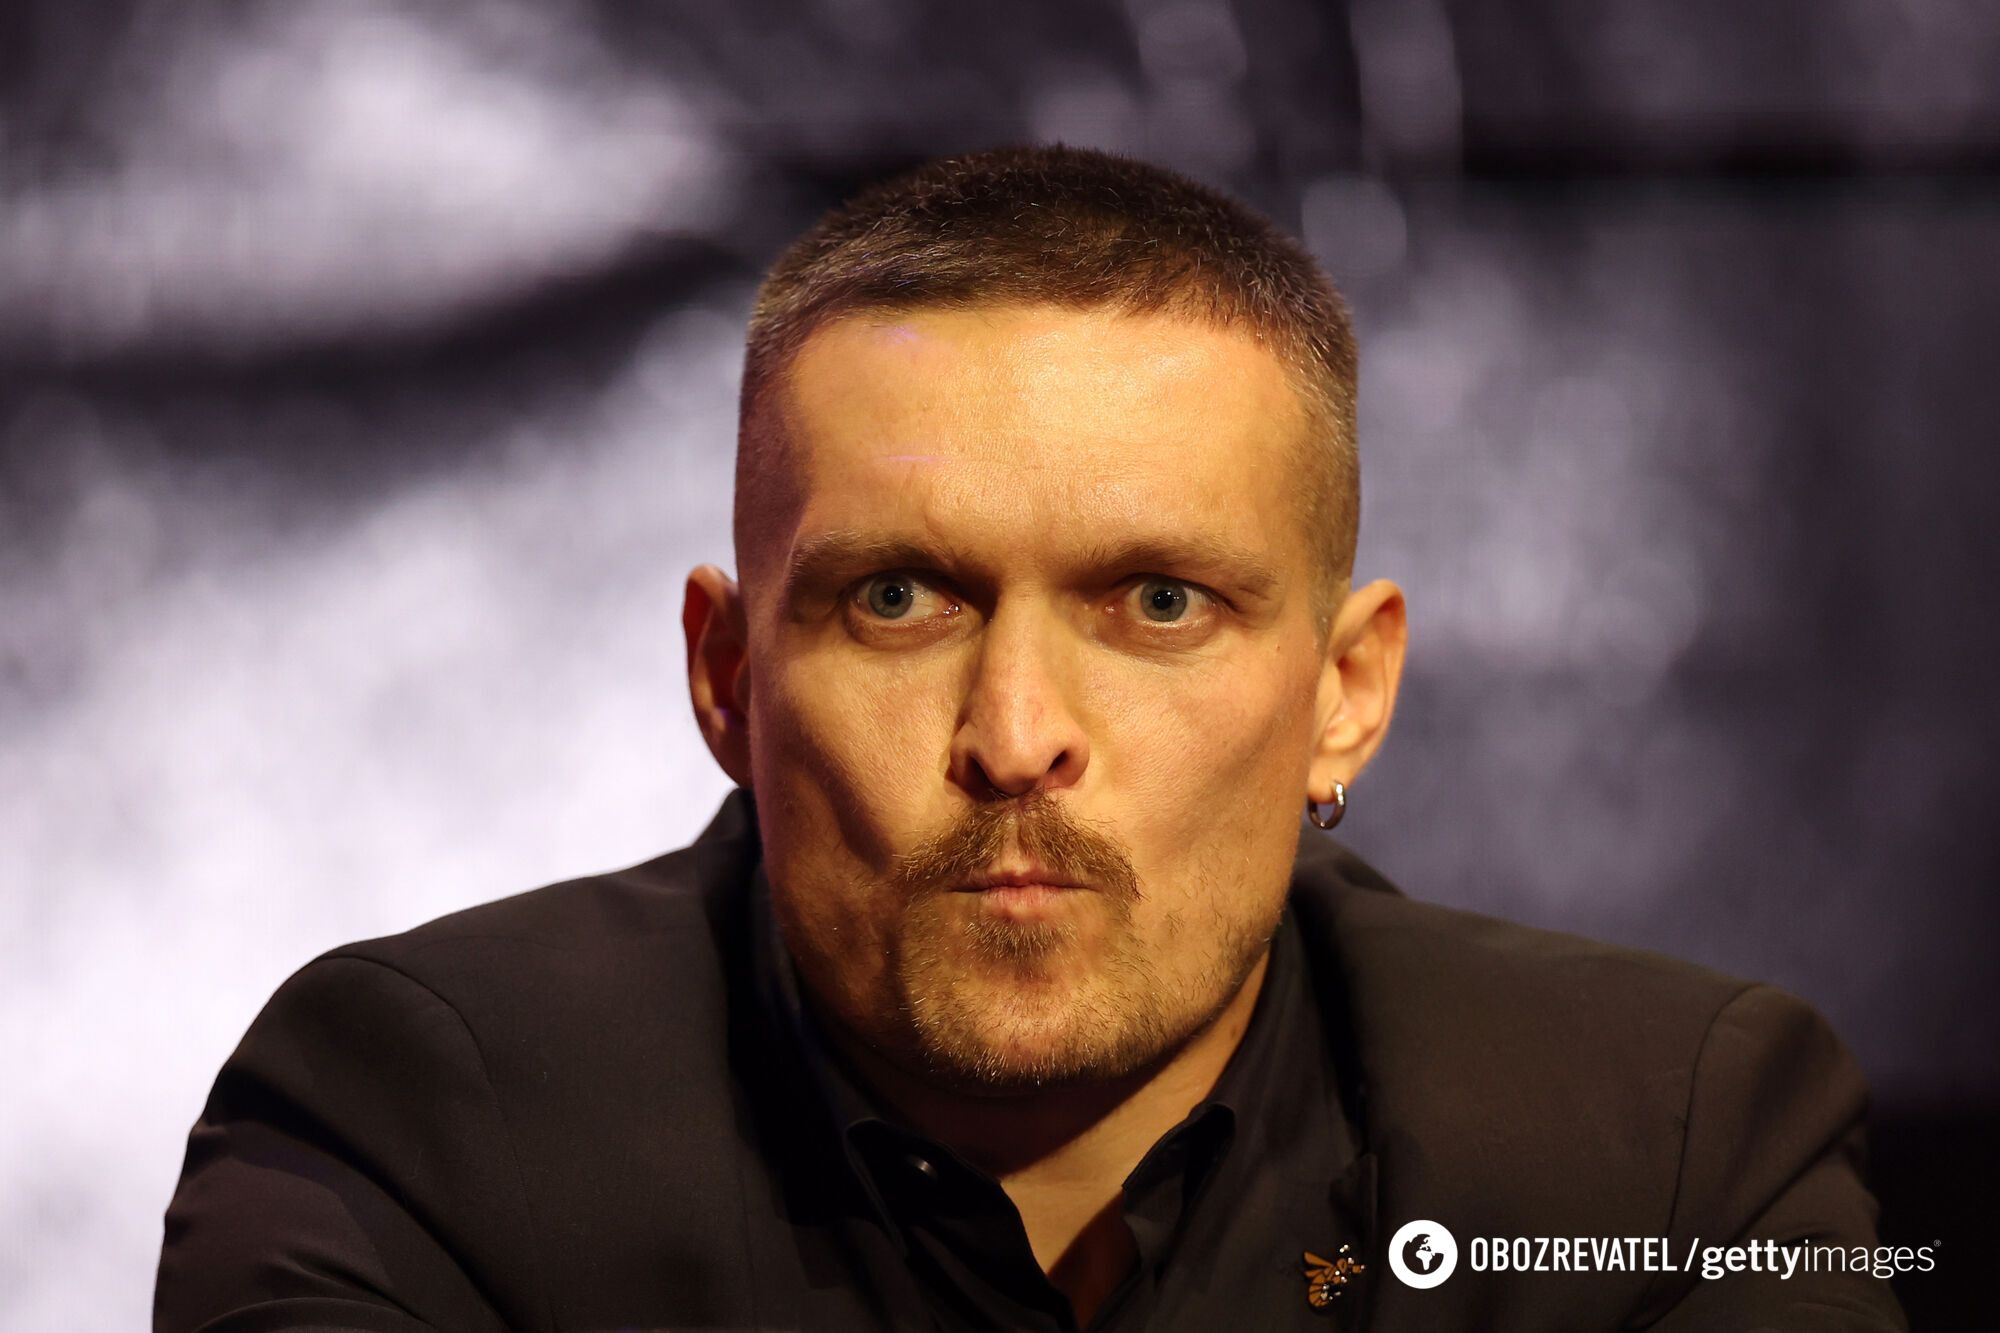 The organizers of the Usyk-Fury fight have made a new condition for boxers to guarantee the fight on May 18